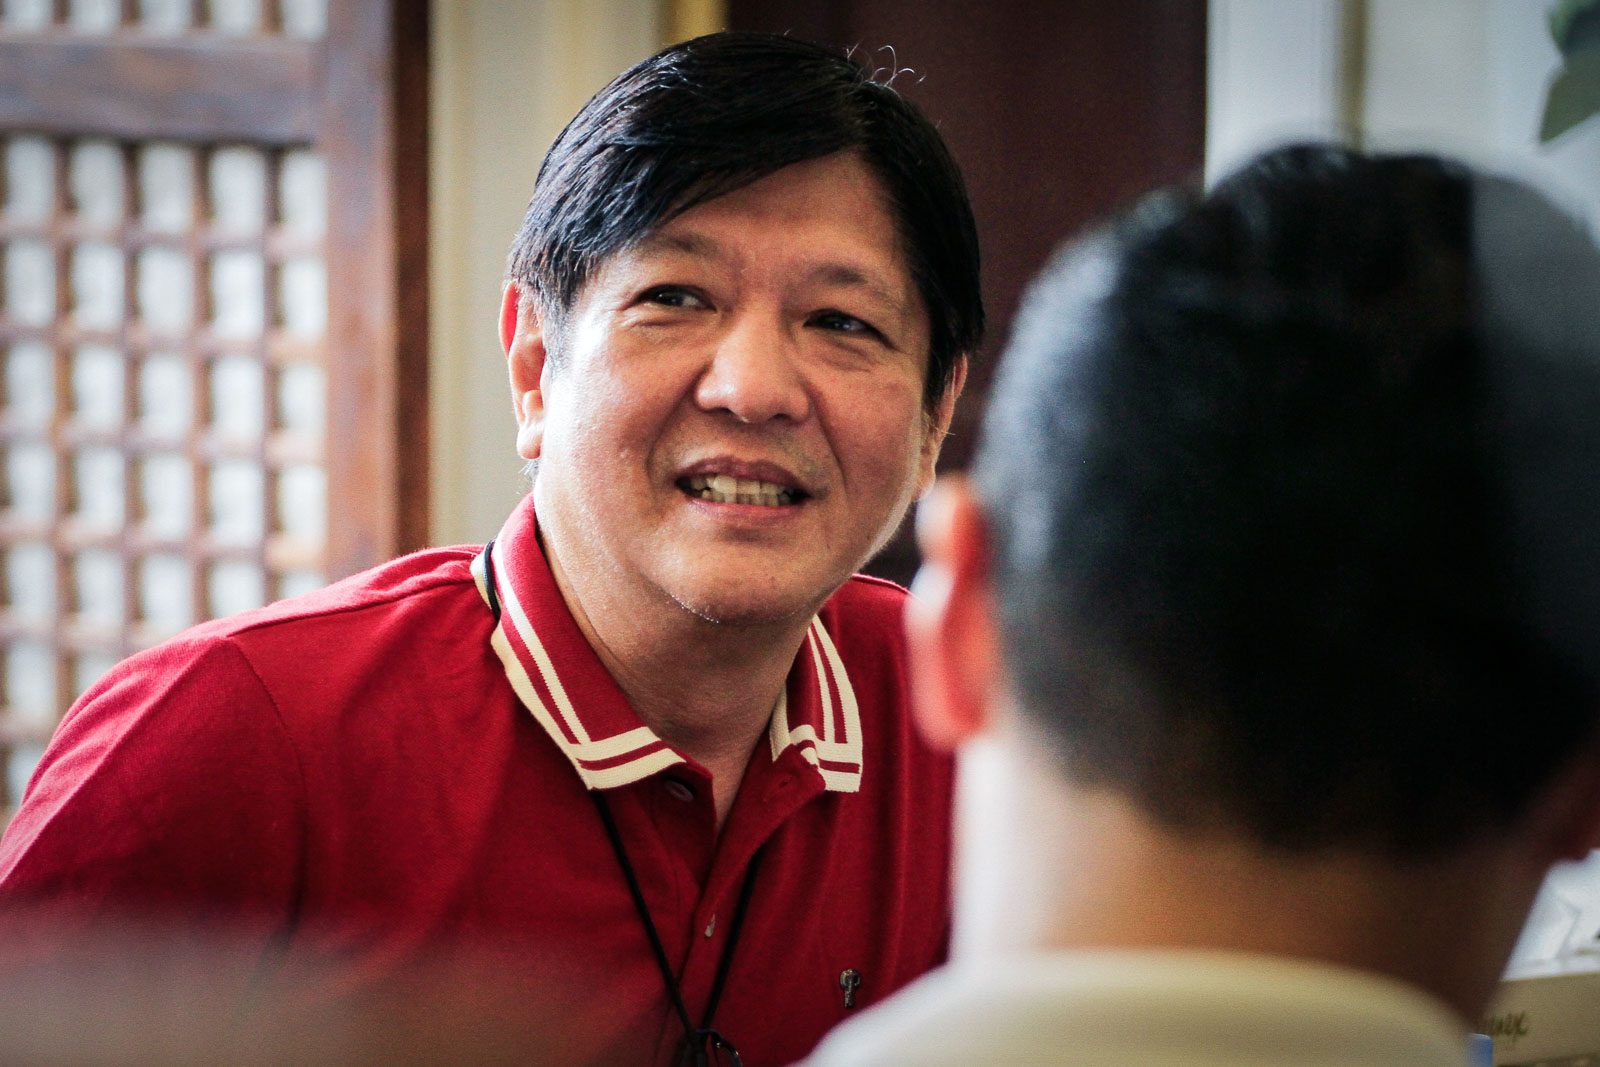 Of top presidential bets, Marcos the only one who won’t release SALN